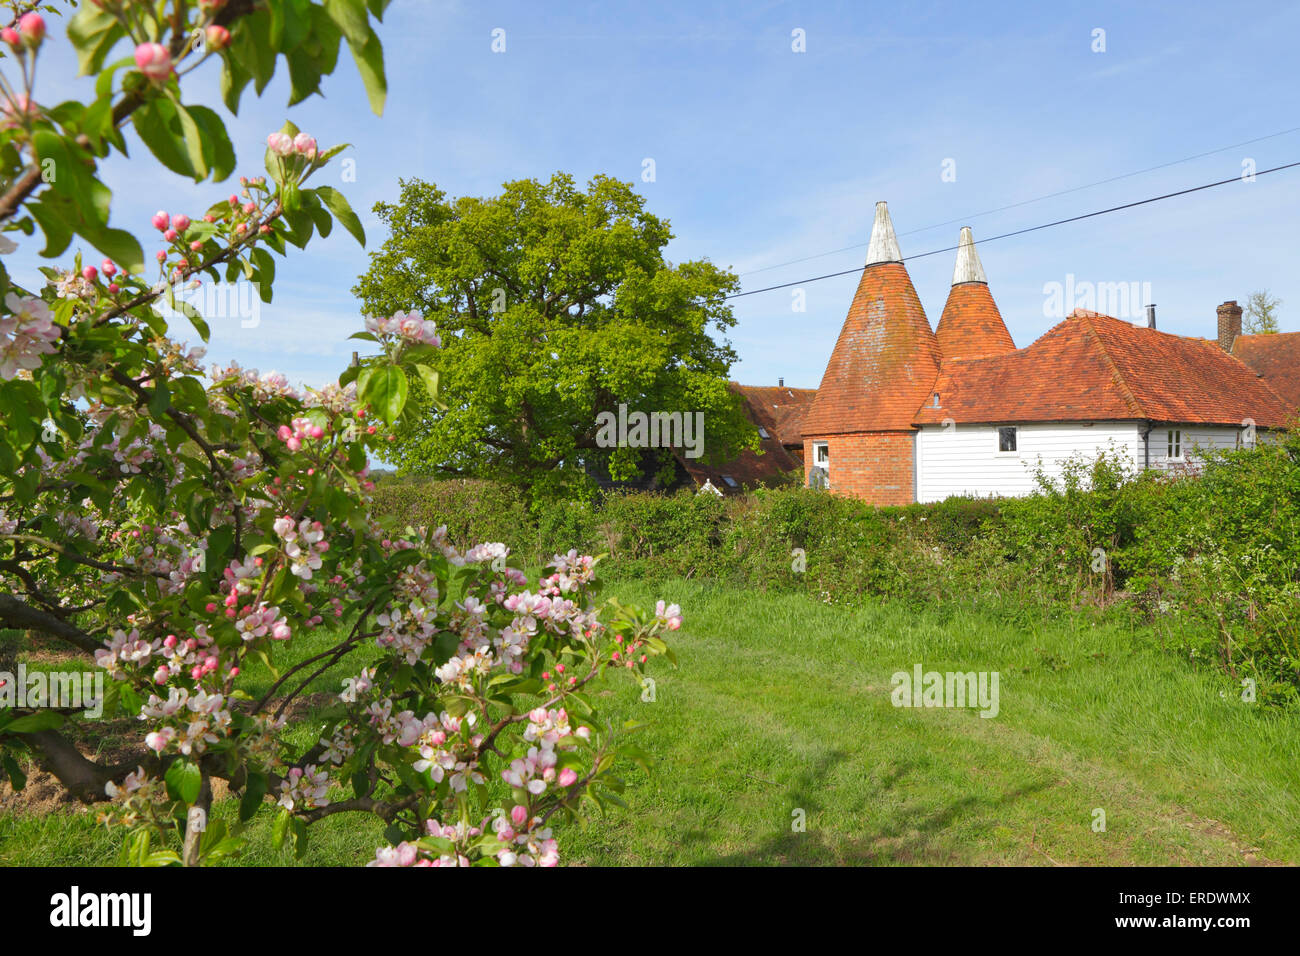 Springtime in Kent, apple blossom and Oast house, England, UK. Traditional Kent countryside scene. Stock Photo